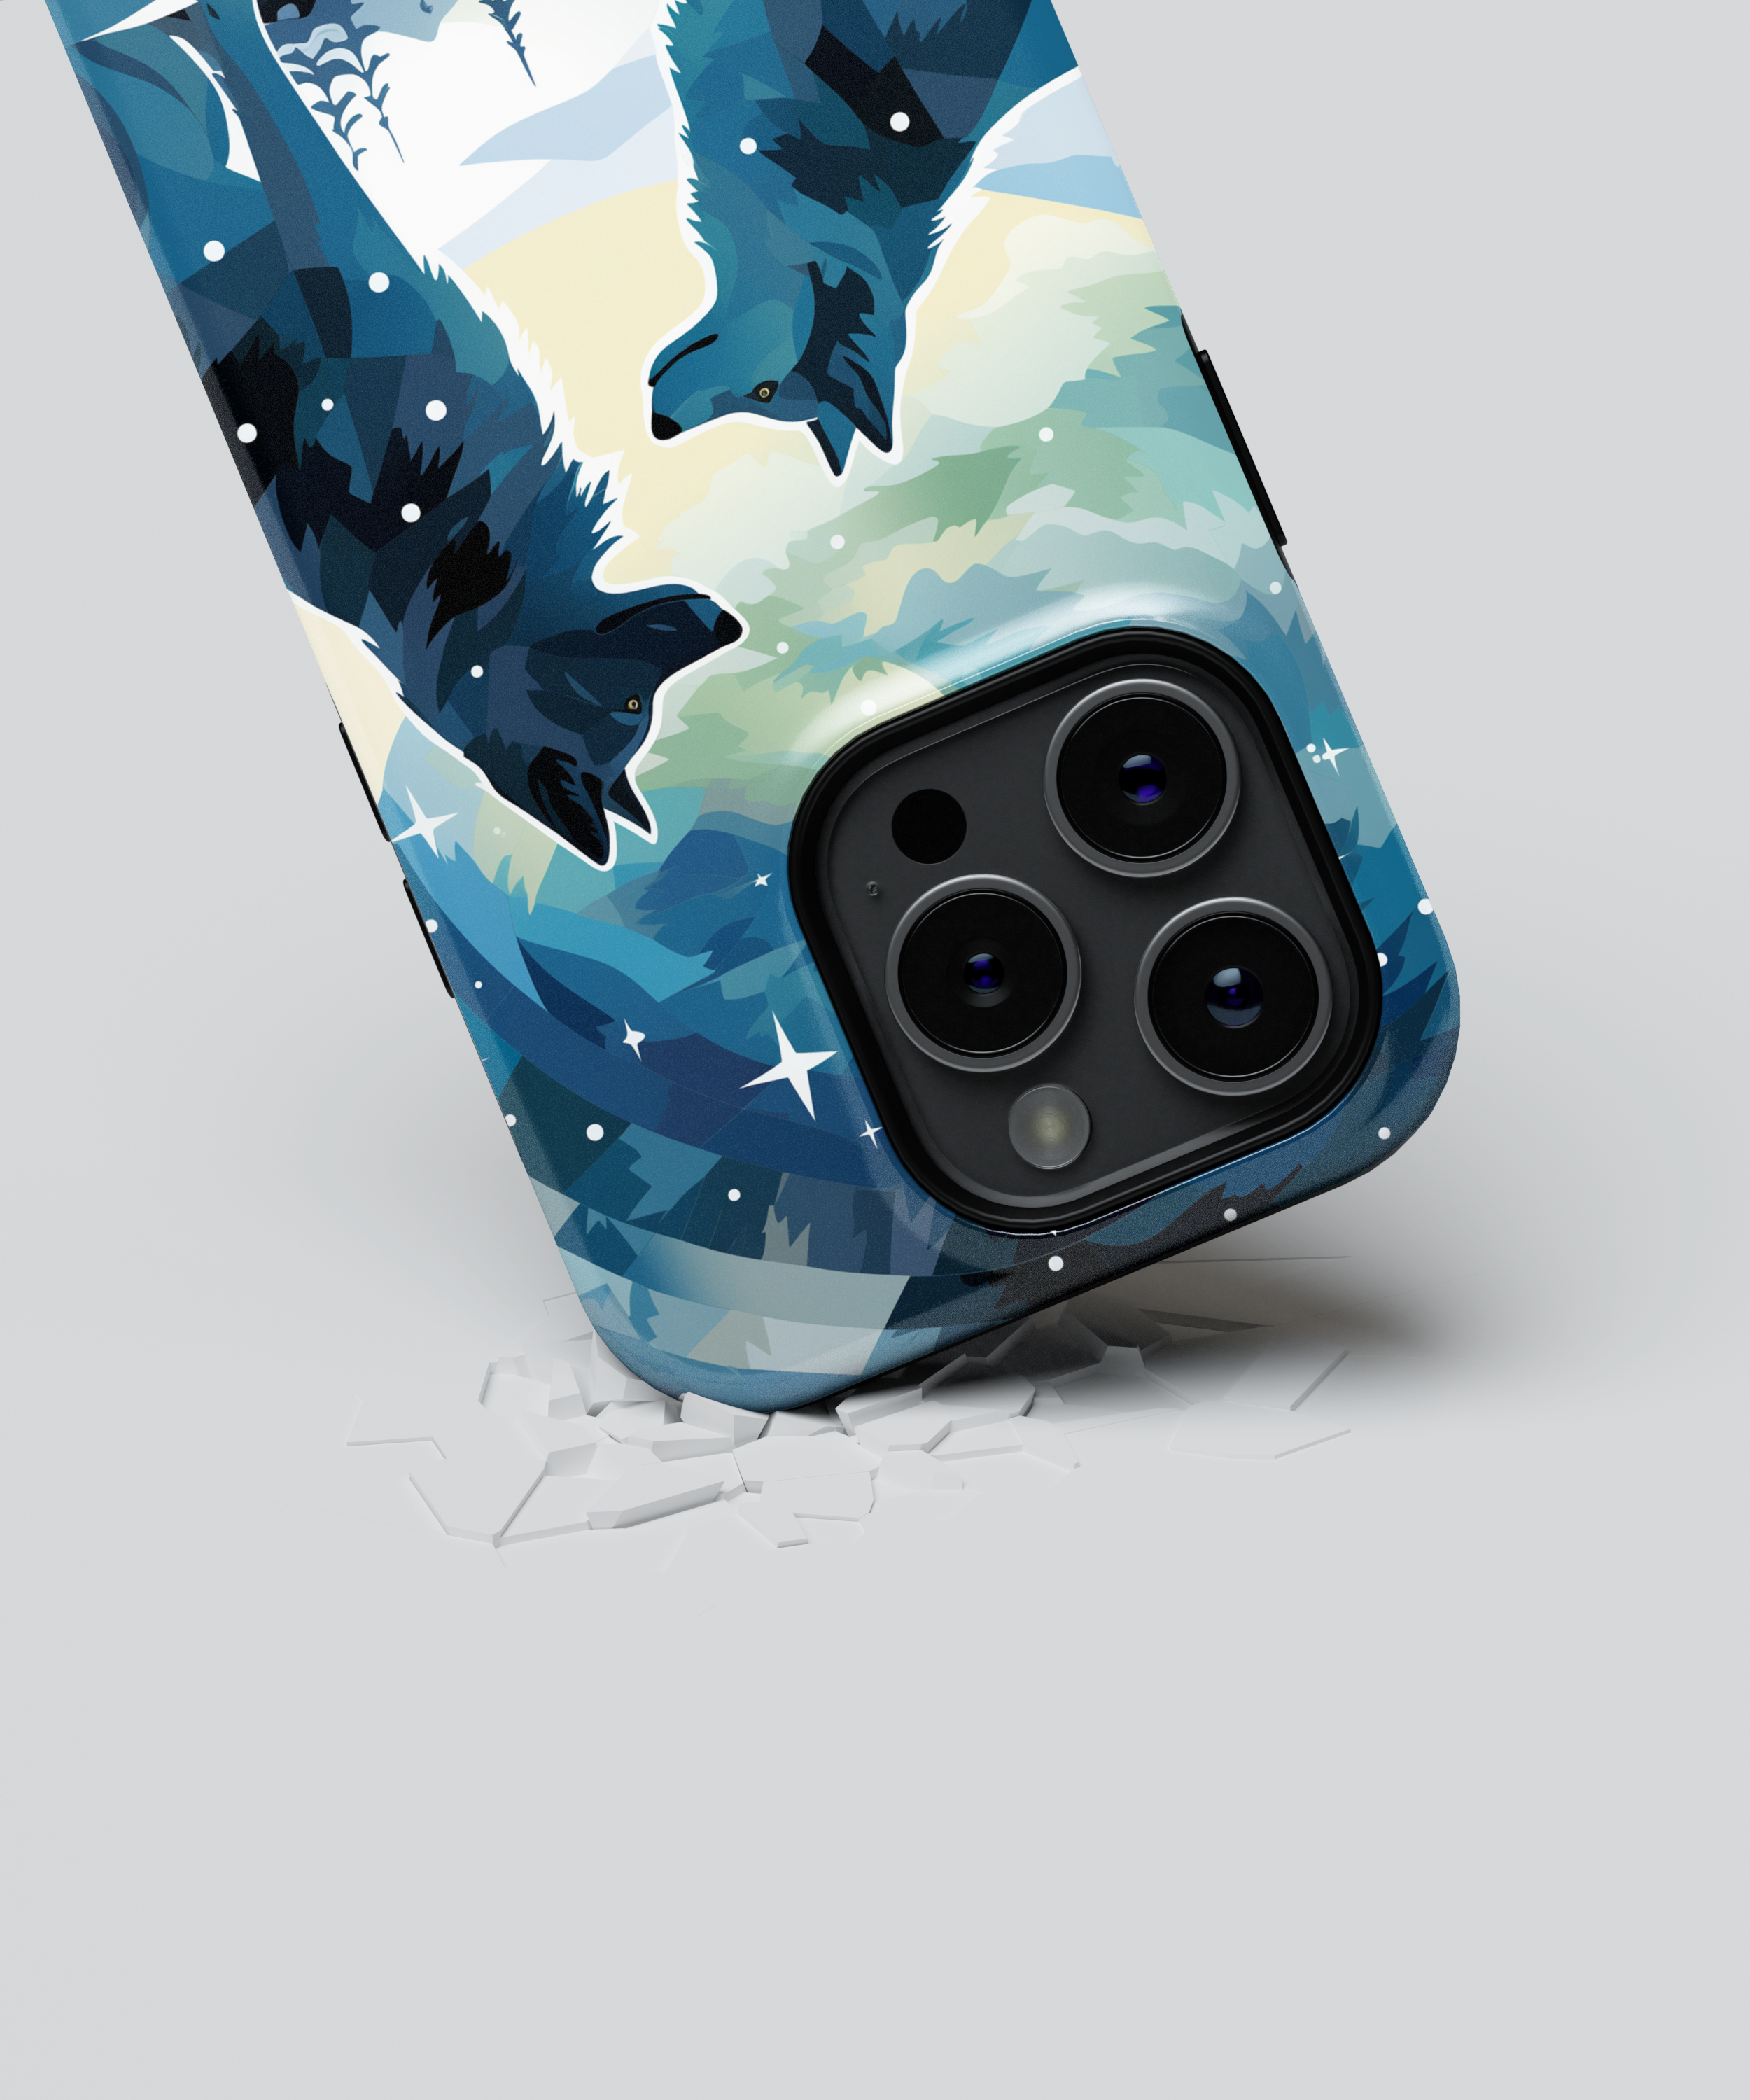 iPhone Tough Case - Arctic Wolves Whispers - CASETEROID